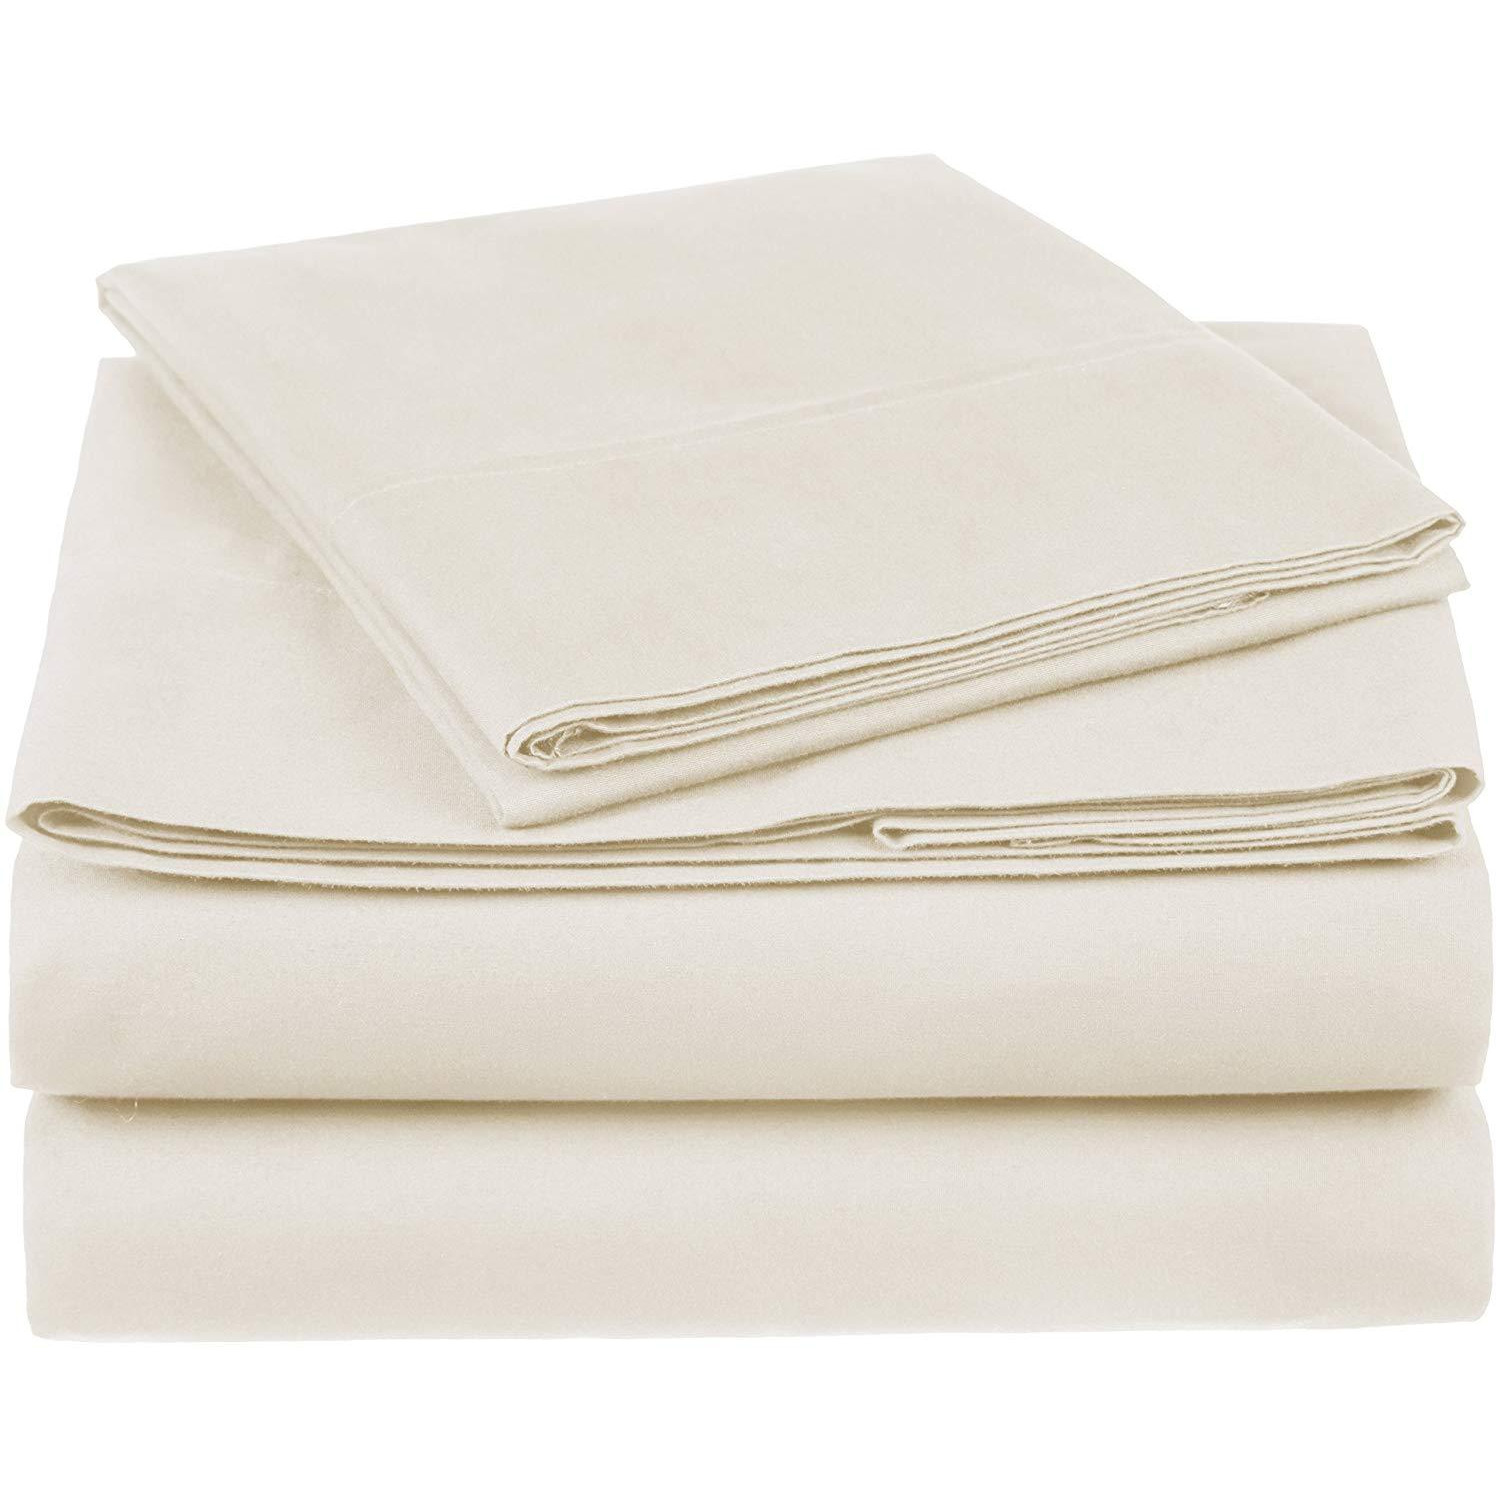 100% Cotton Sheet Set - 500 Thread Count (Piece:4 PIECE, Size:KING, Color:TAUPE)